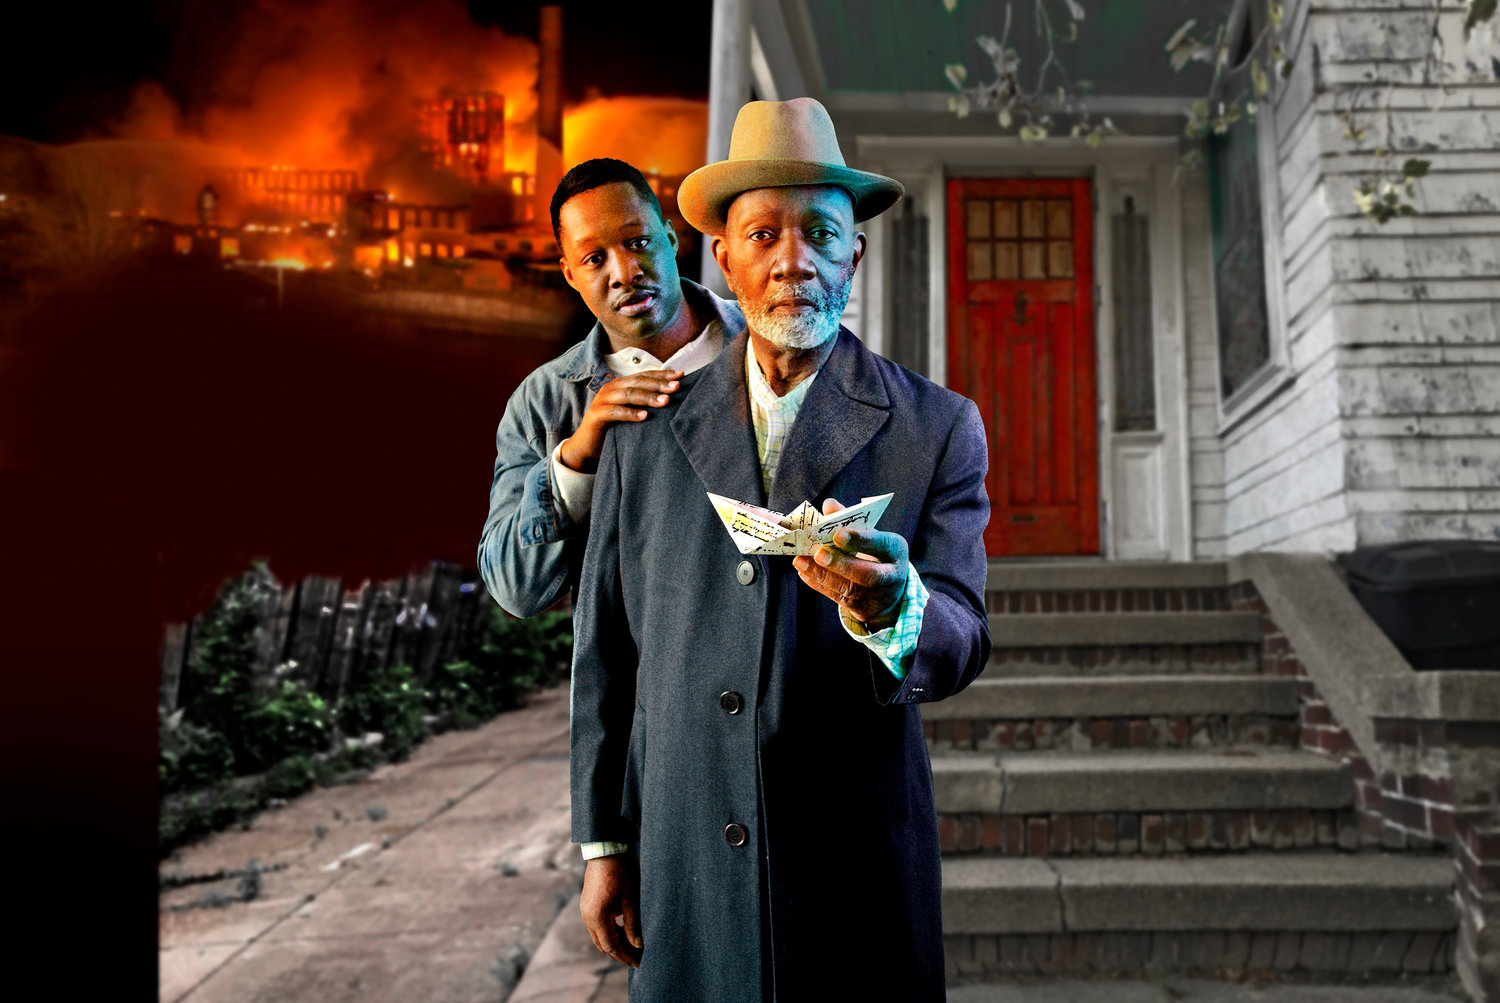 Christopher Lindsay (left) and Ricardo Pitts-Wiley in August Wilson’s Gem of the Ocean.